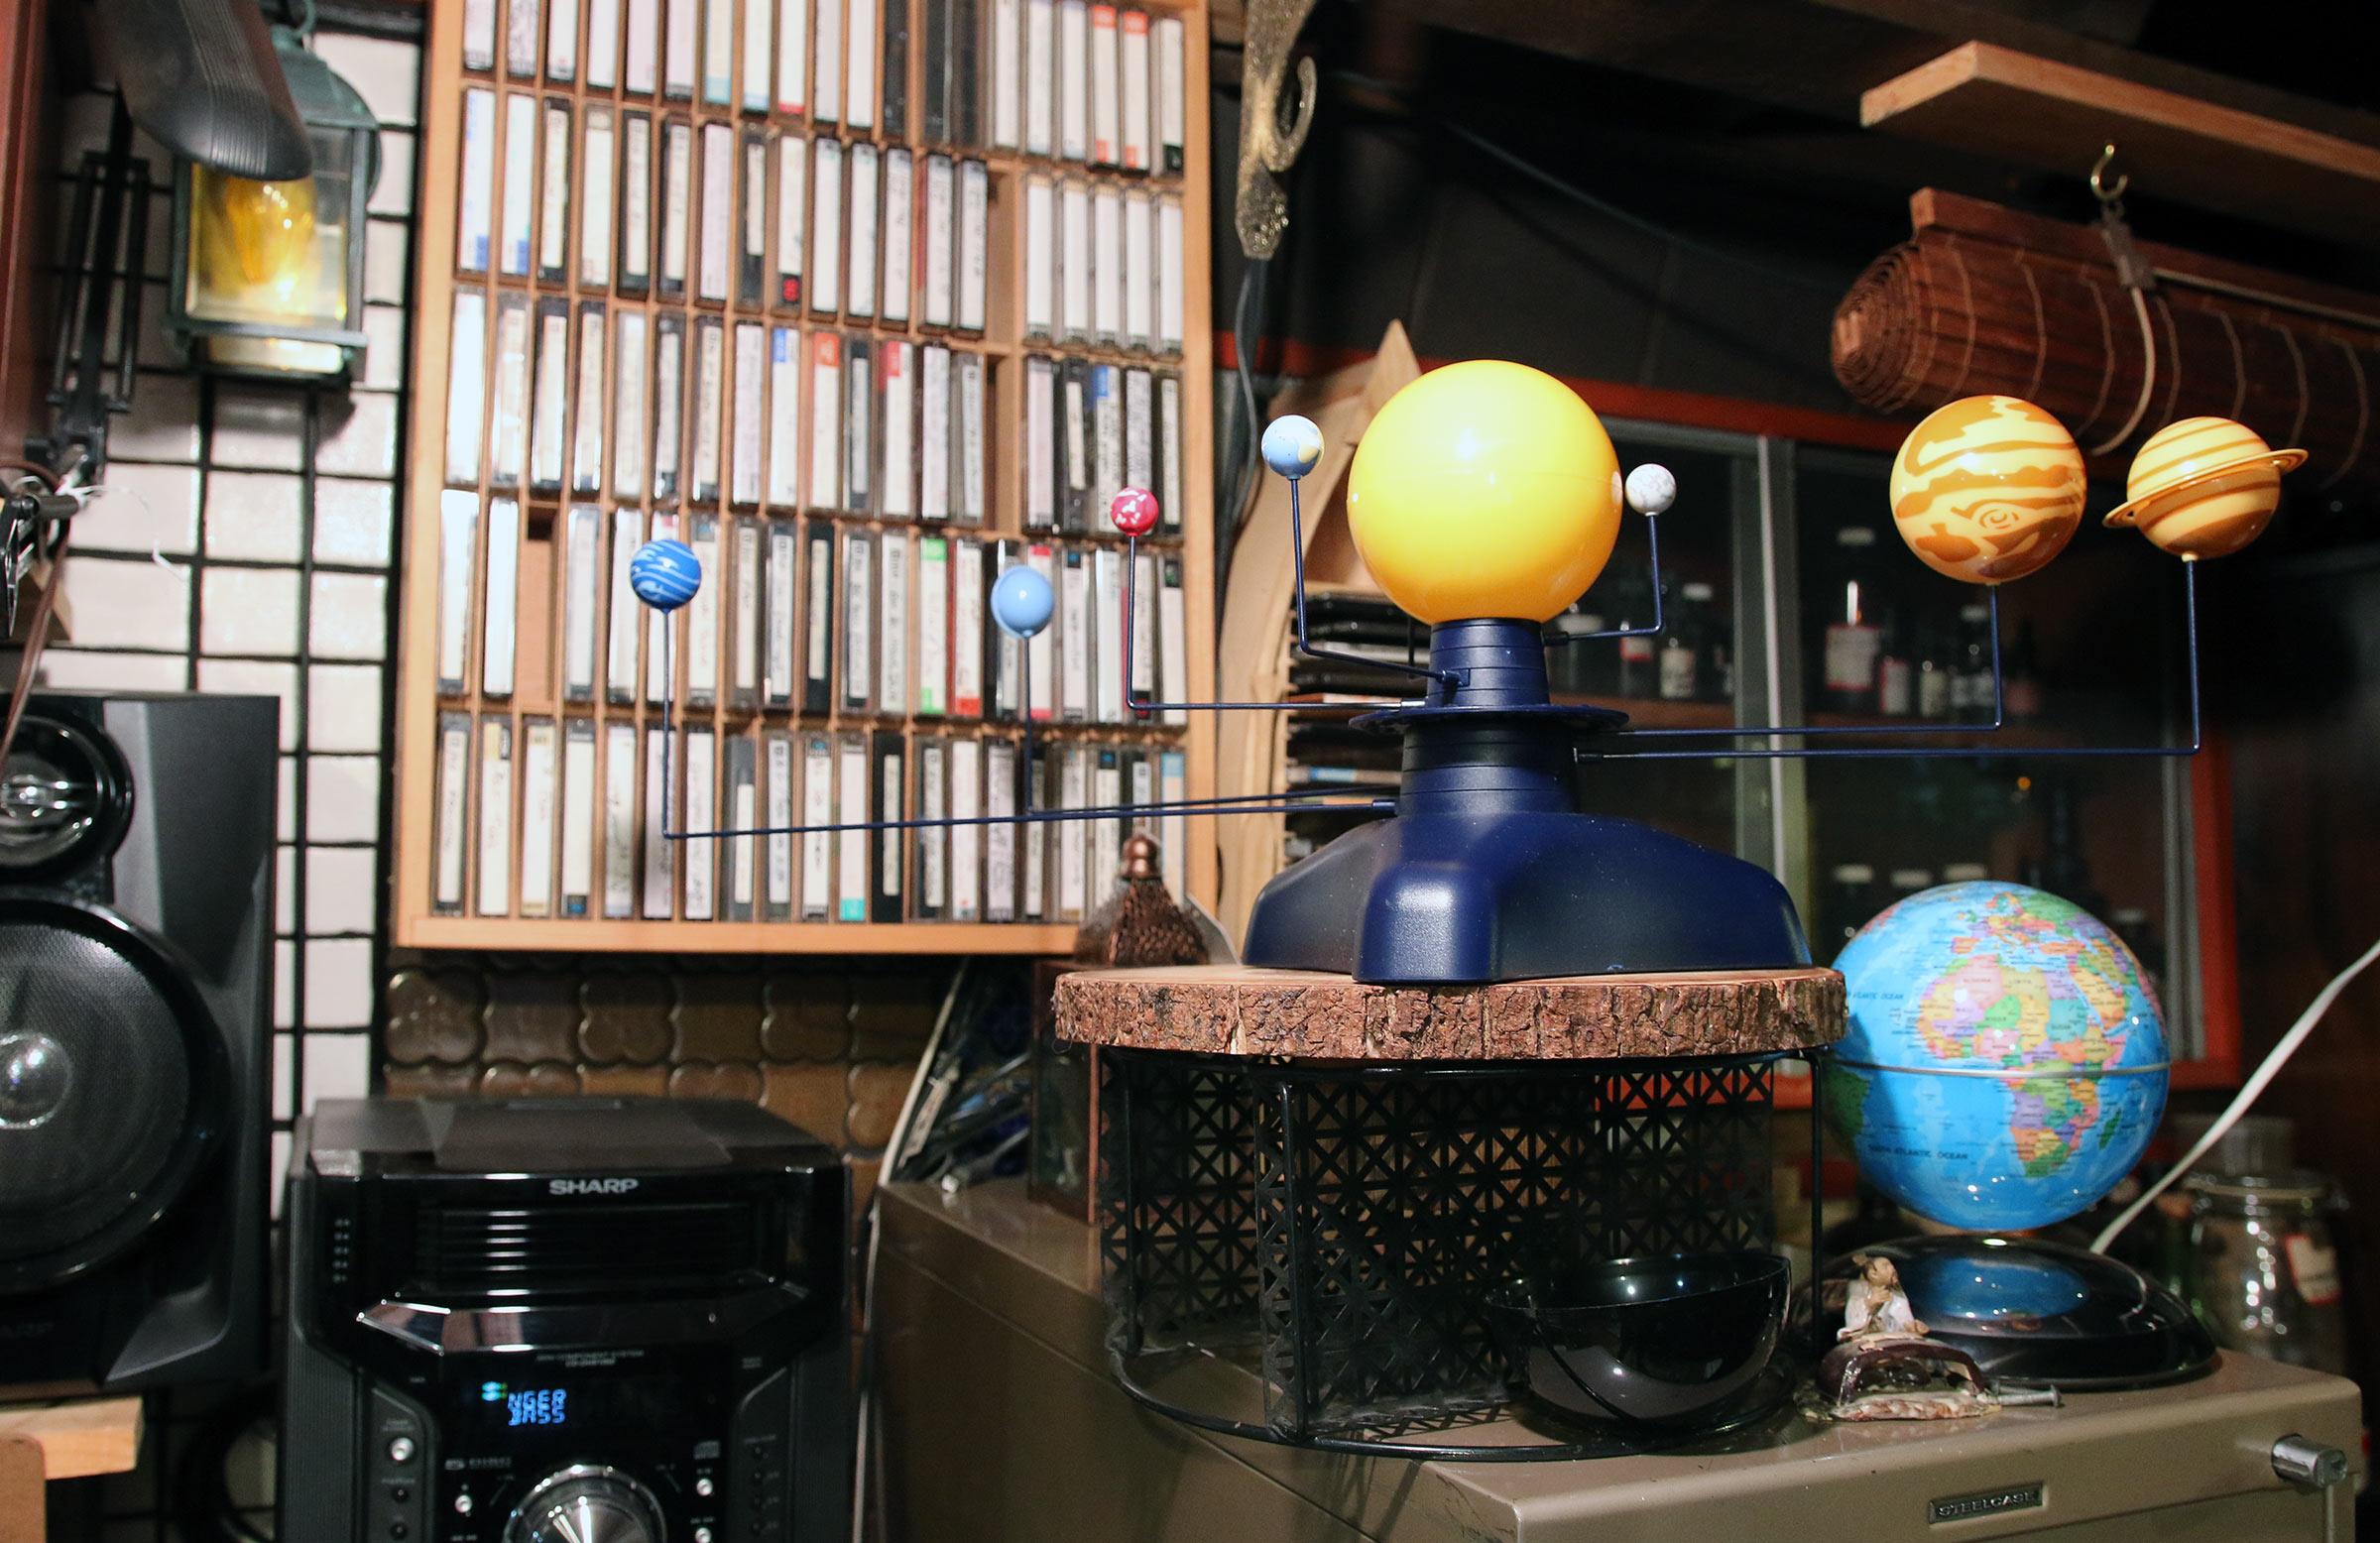 A globe of the earth as well as globes of other planets and satellites in our solar system sits in front of a shelf filled with cassettes of Milford Graves's performances.